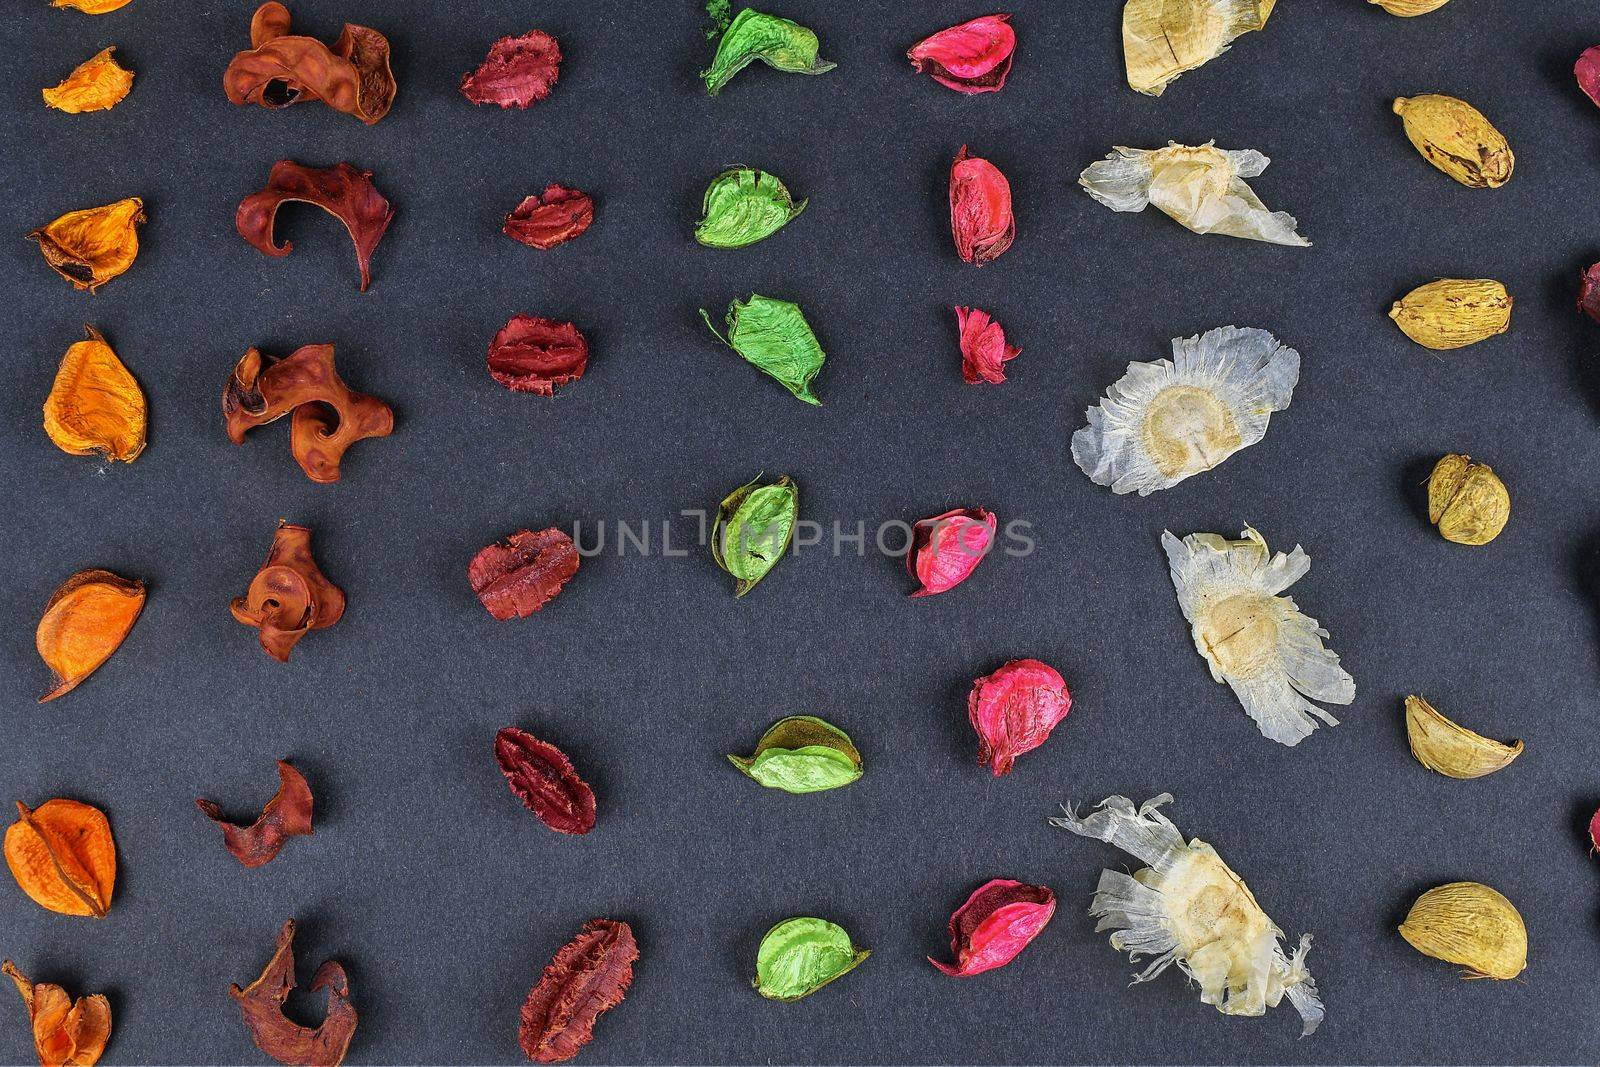 Dried aromatic plant parts, dried flowers, dried fragrance. Geometric pattern